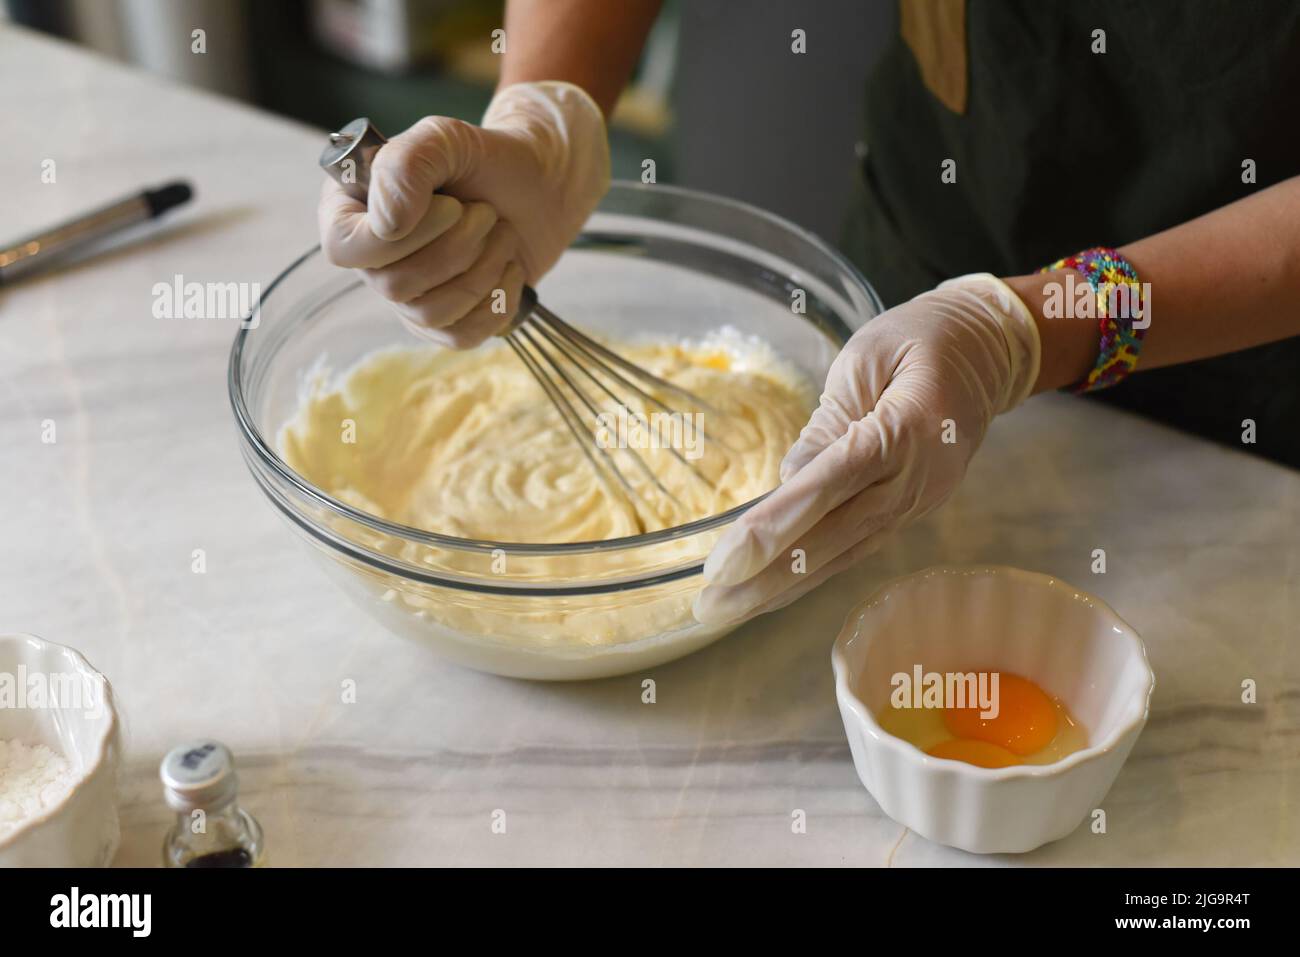 A hands in rubber gloves stirring  dough for a cake Stock Photo